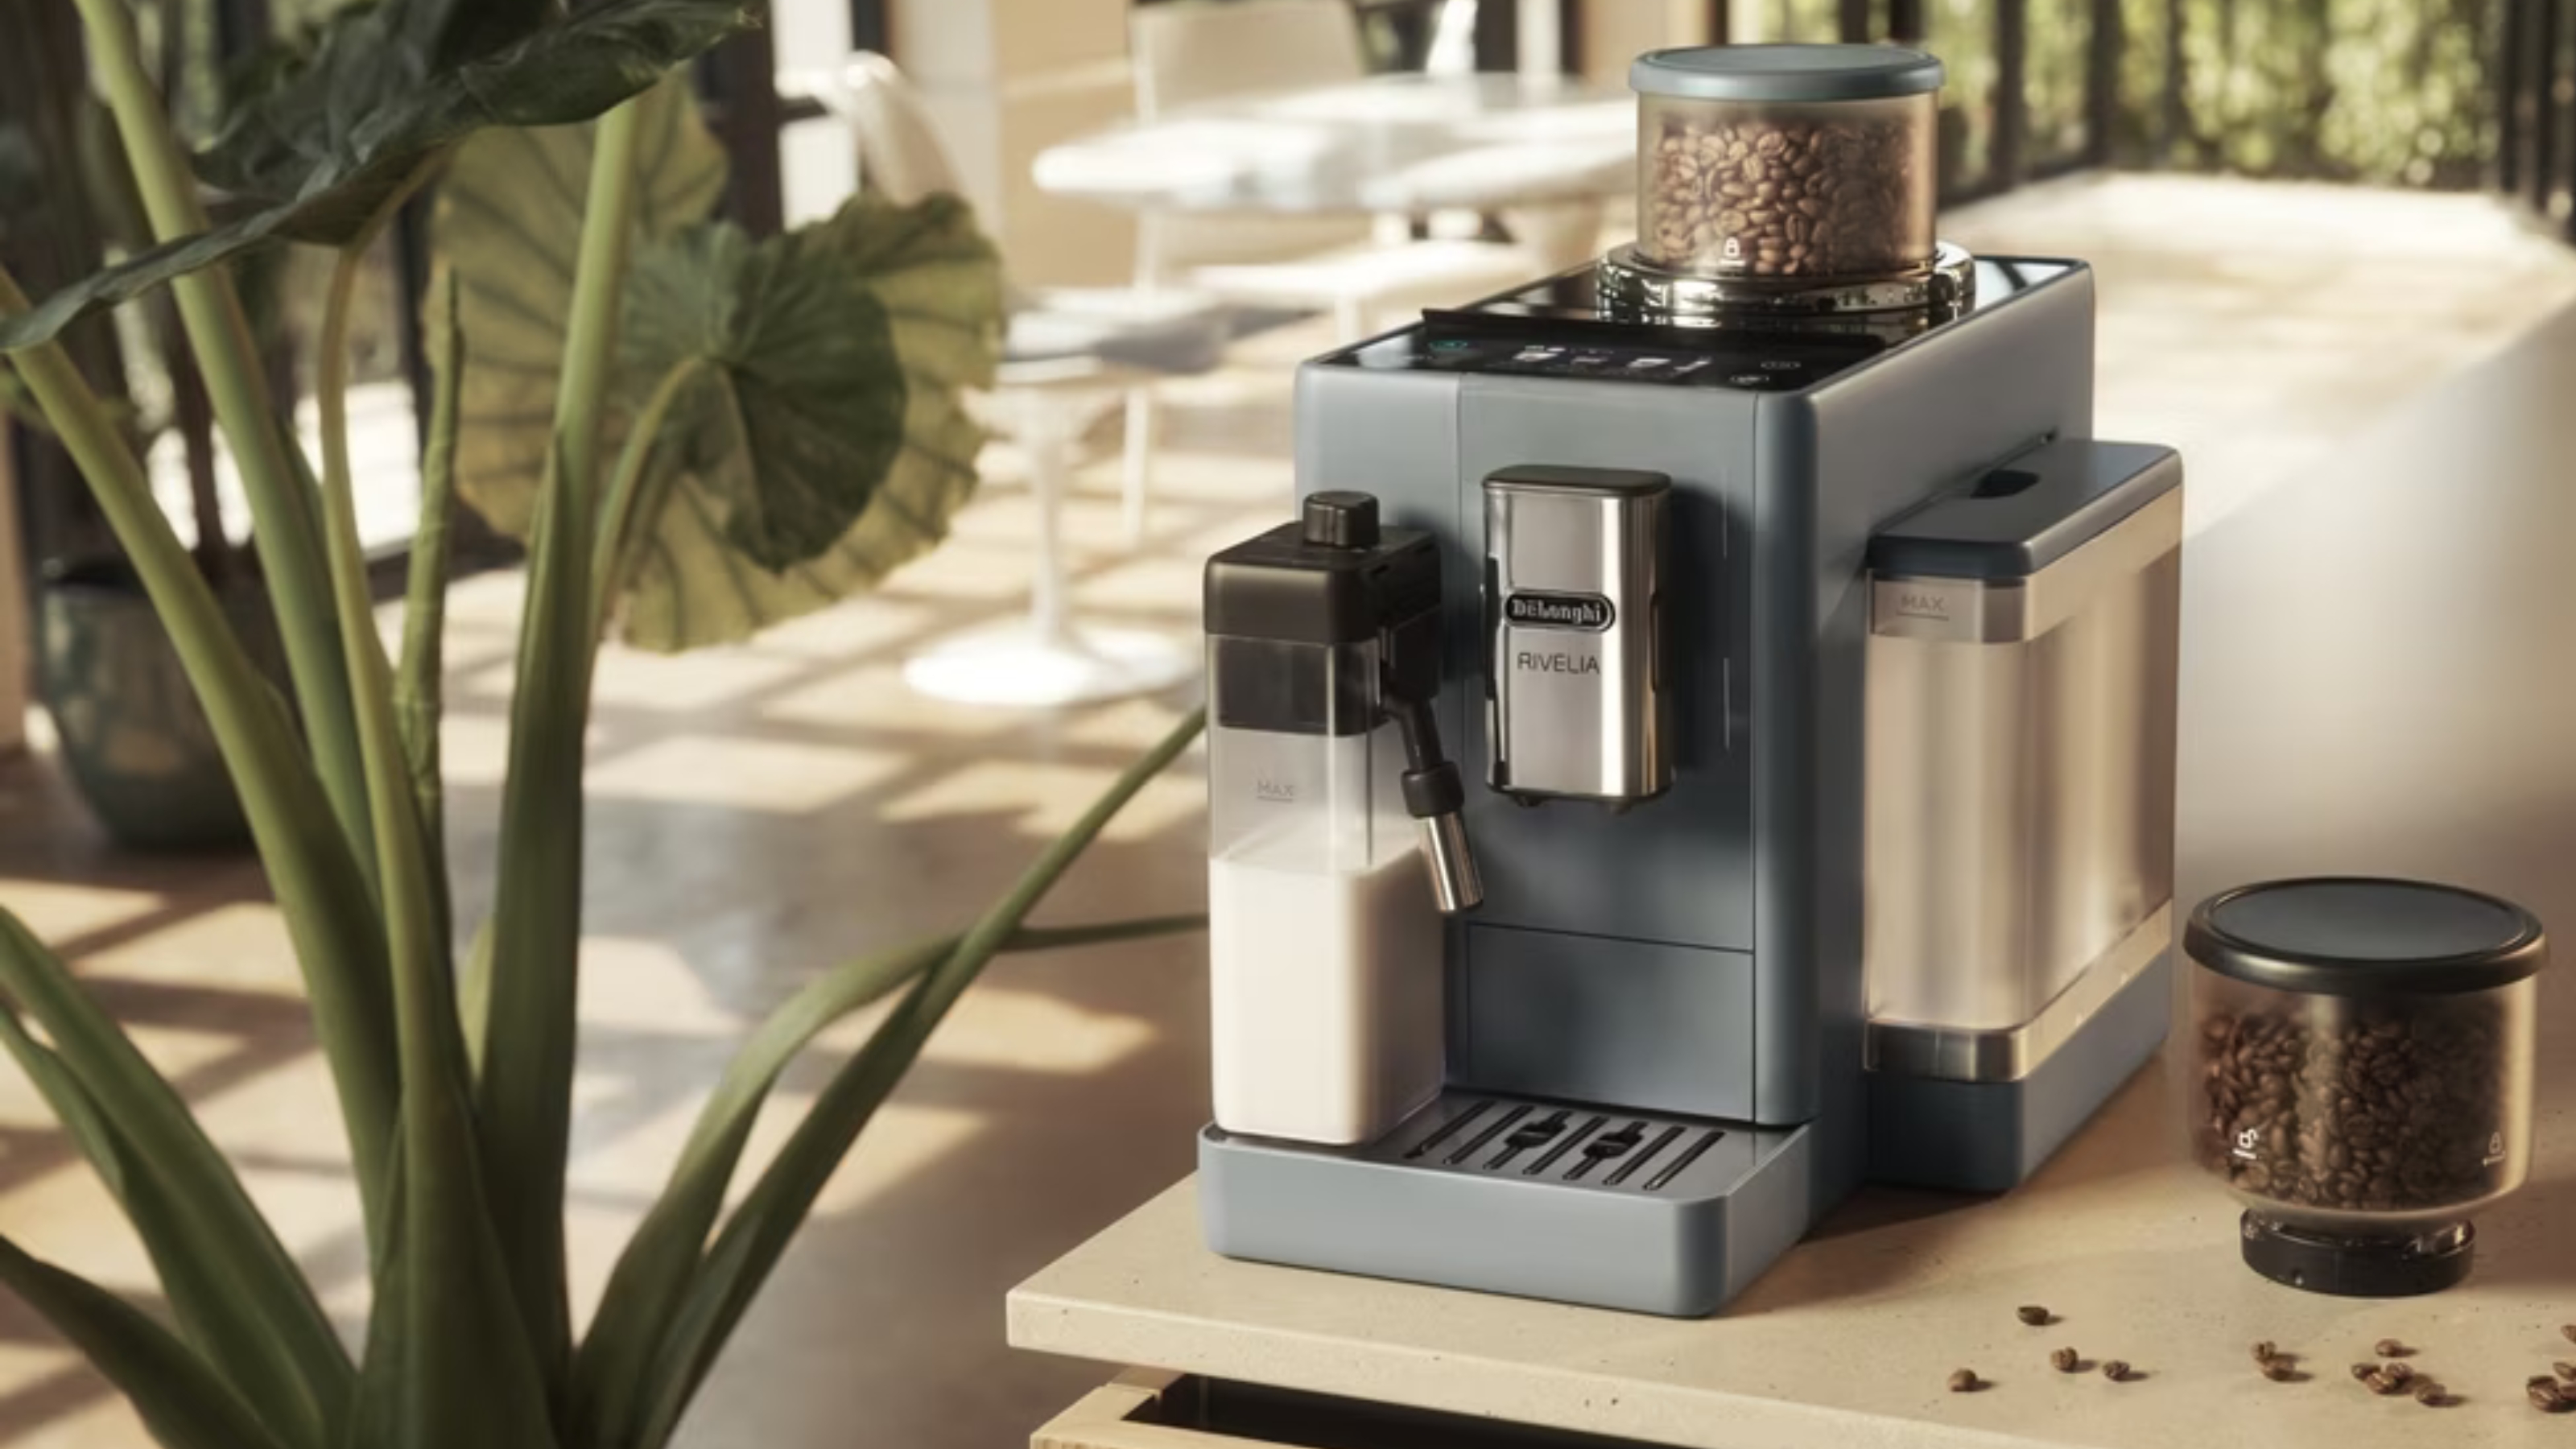 How to Use the Water Filter in Your De'longhi Coffee Care Kit 